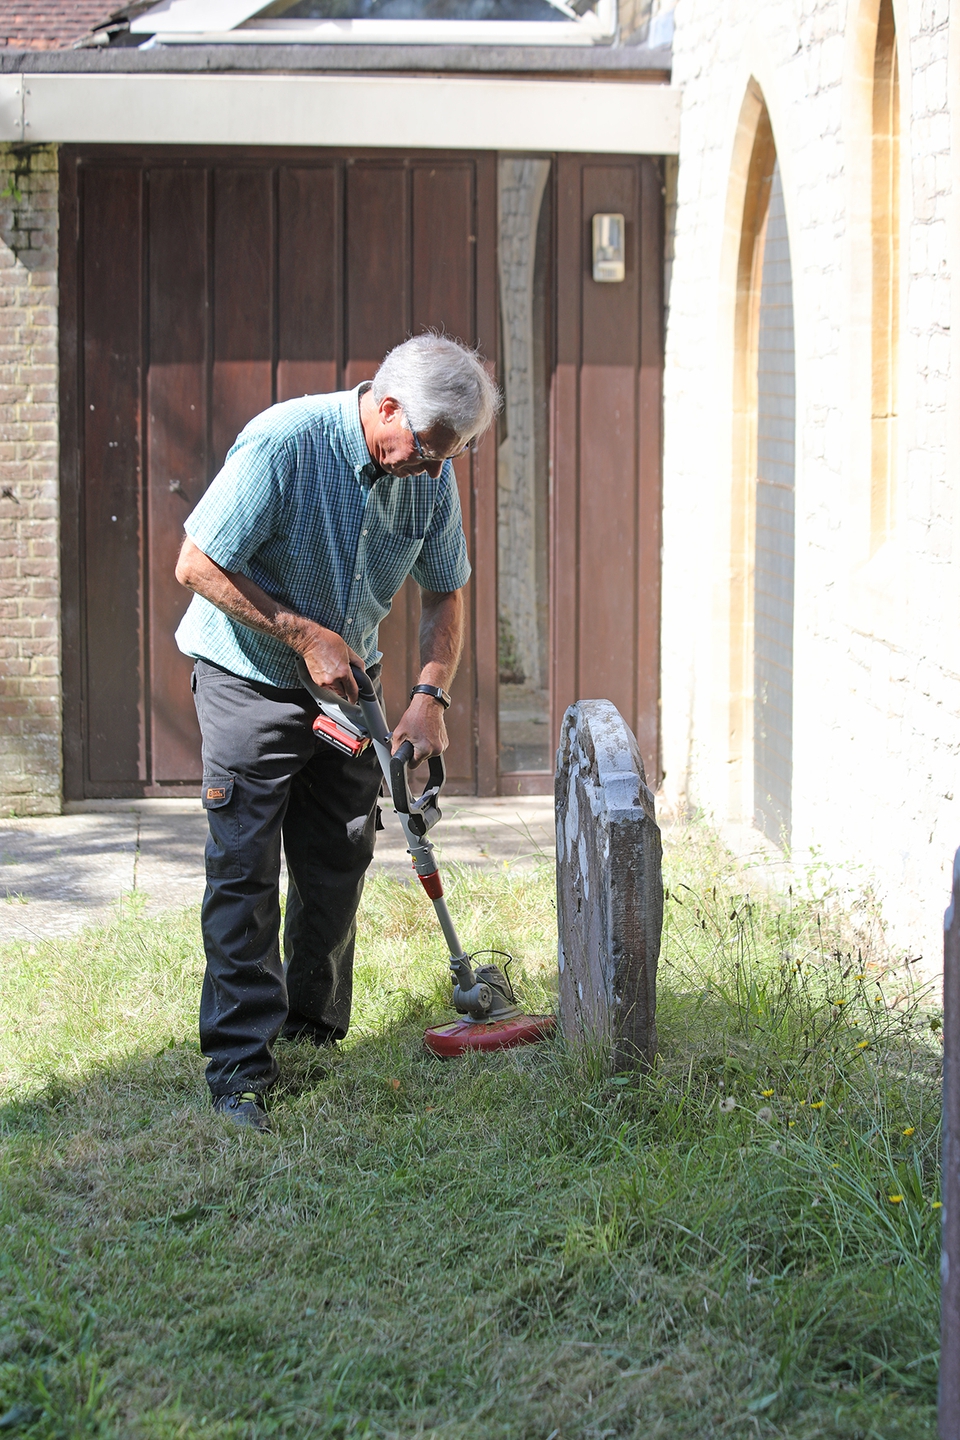 Keeping the graves themselves tidy is important